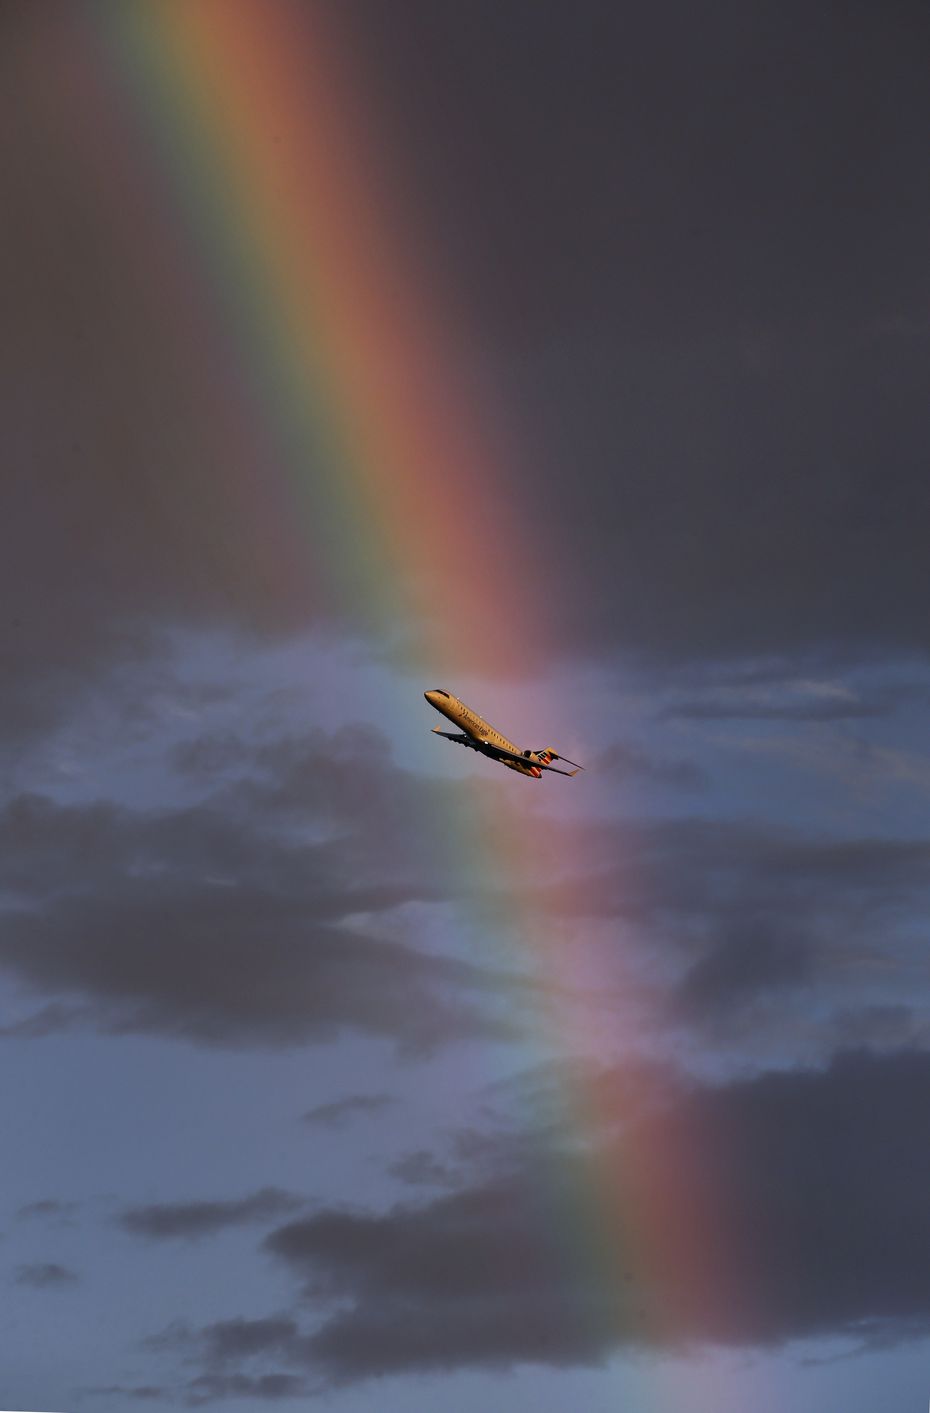 Remnants of Tropical Storm Laura made for a beautiful rainbow at sunset as an American Airlines jet took flight from DFW International Airport on Aug. 27, 2020.